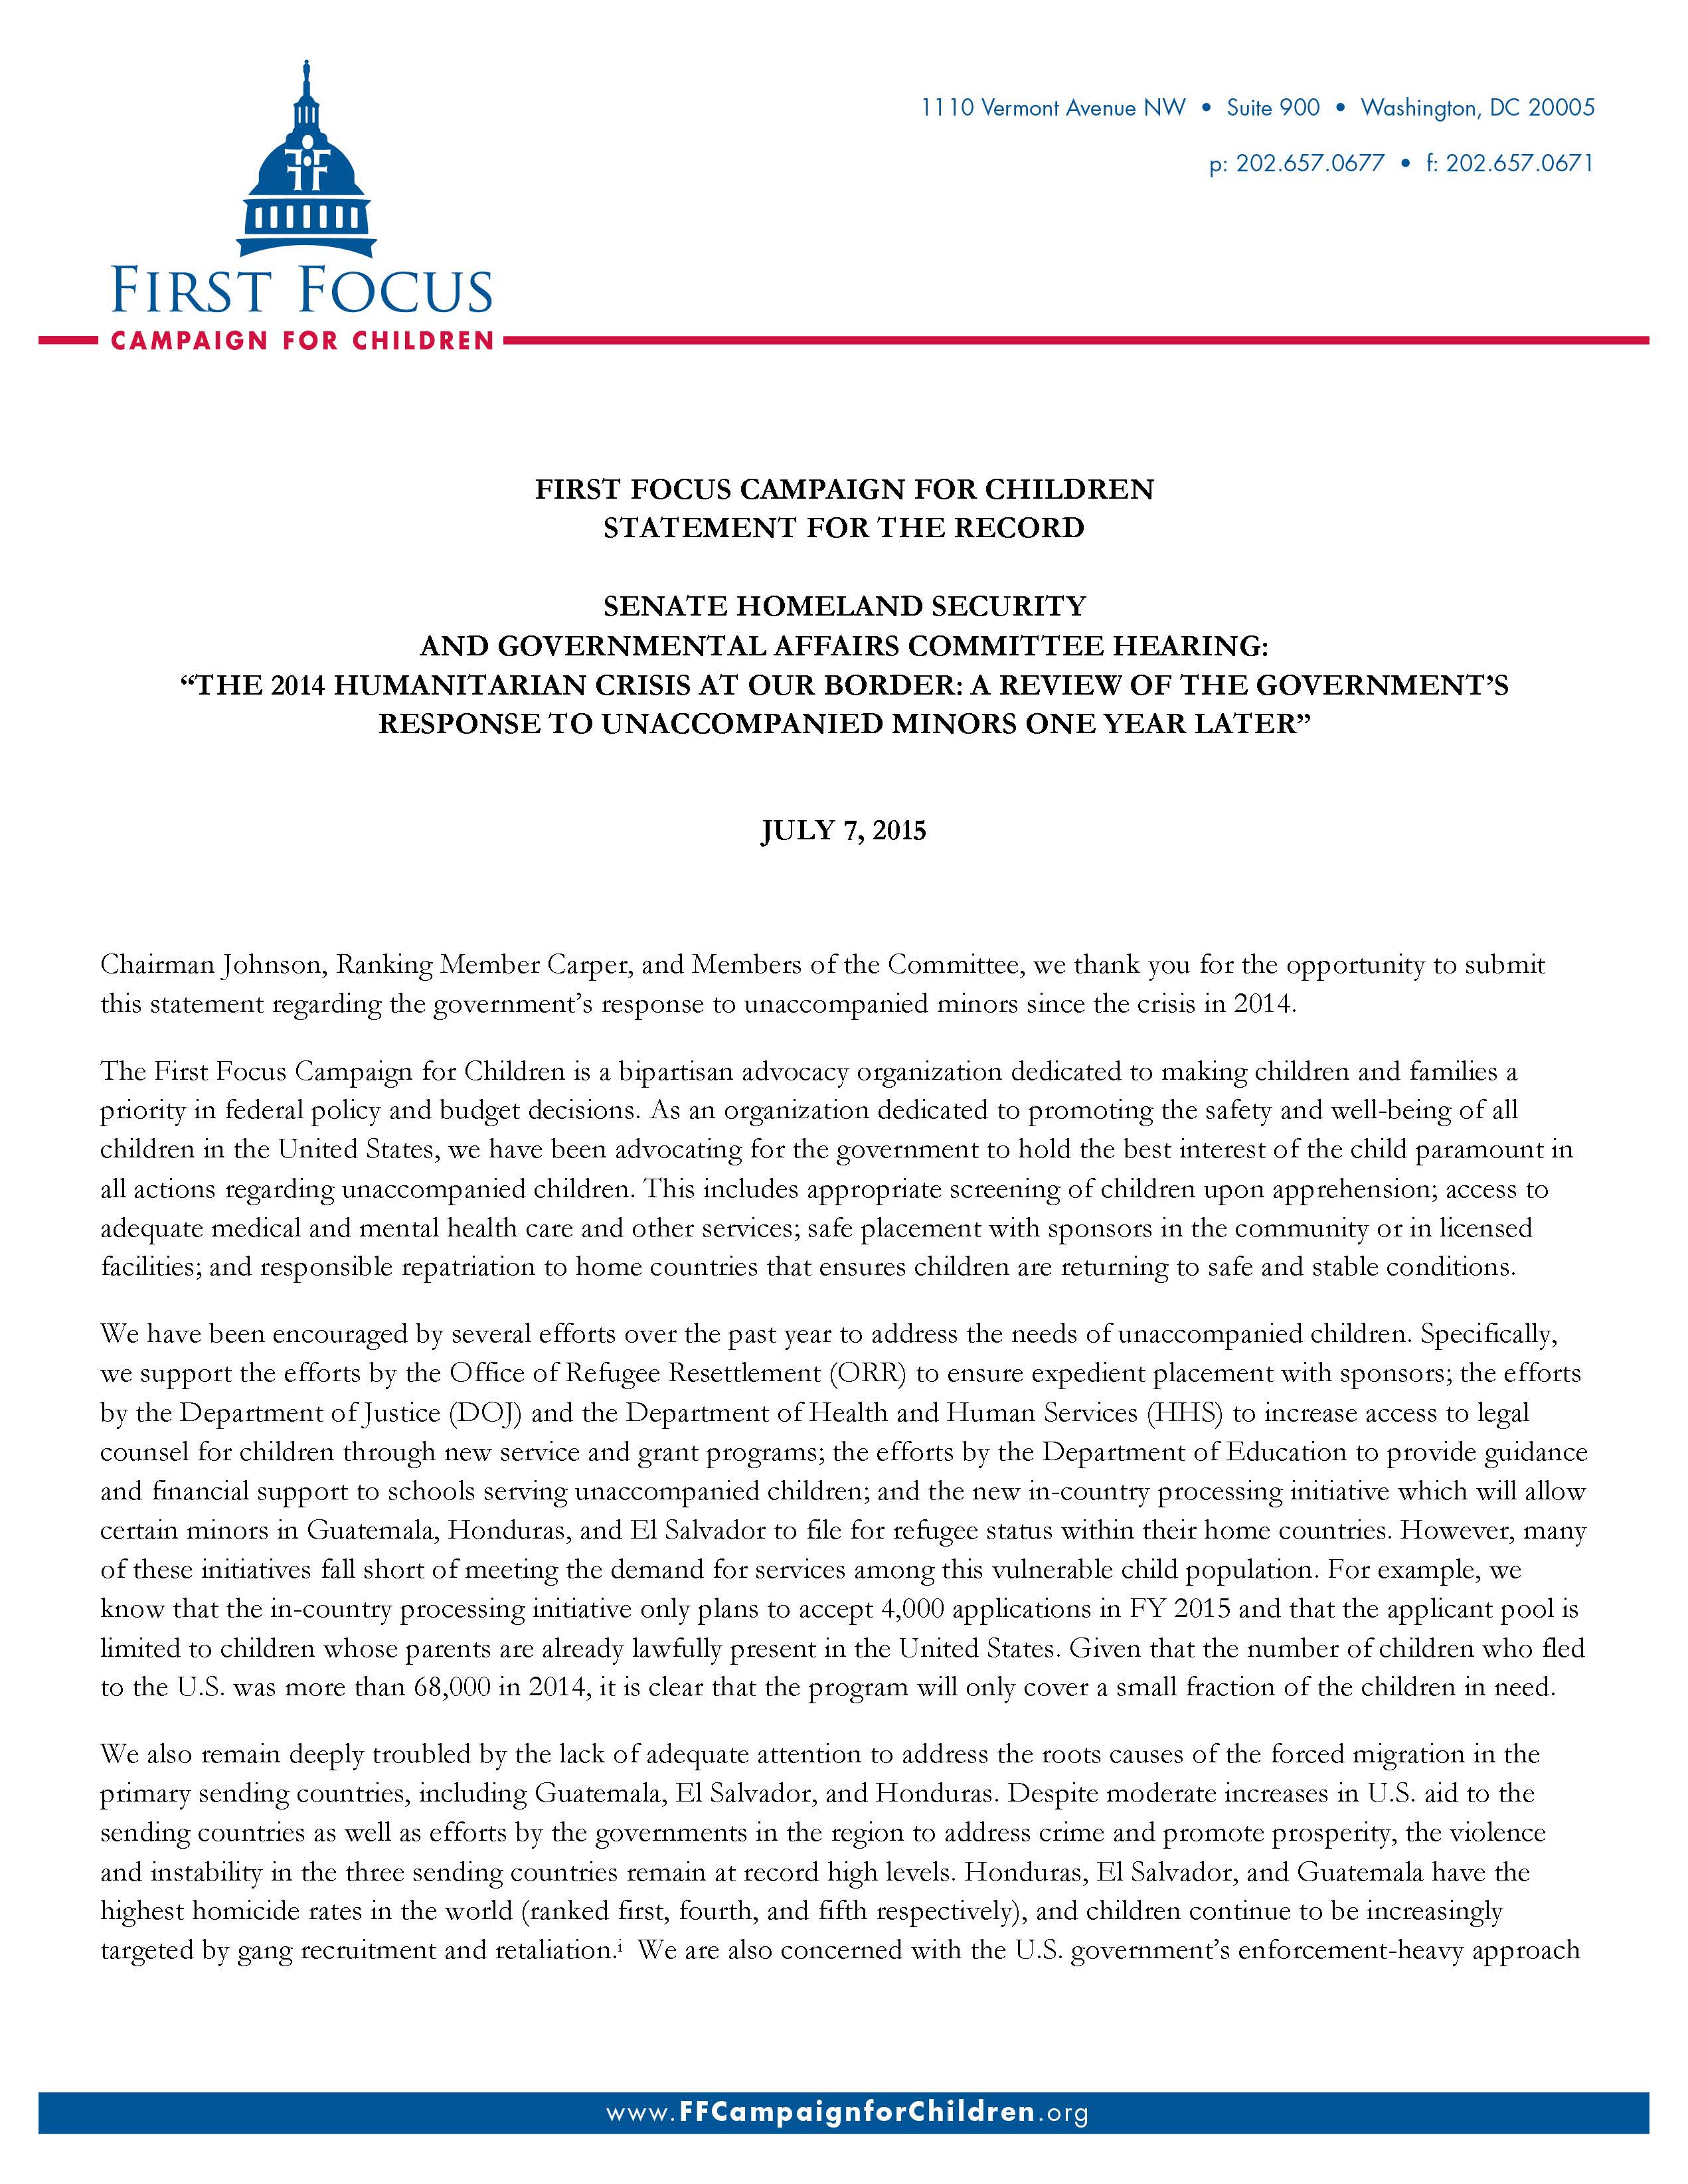 FFCC Statement for Senate Homeland Security  Governmental Affairs Committee hearing 7 7 15_Page_1